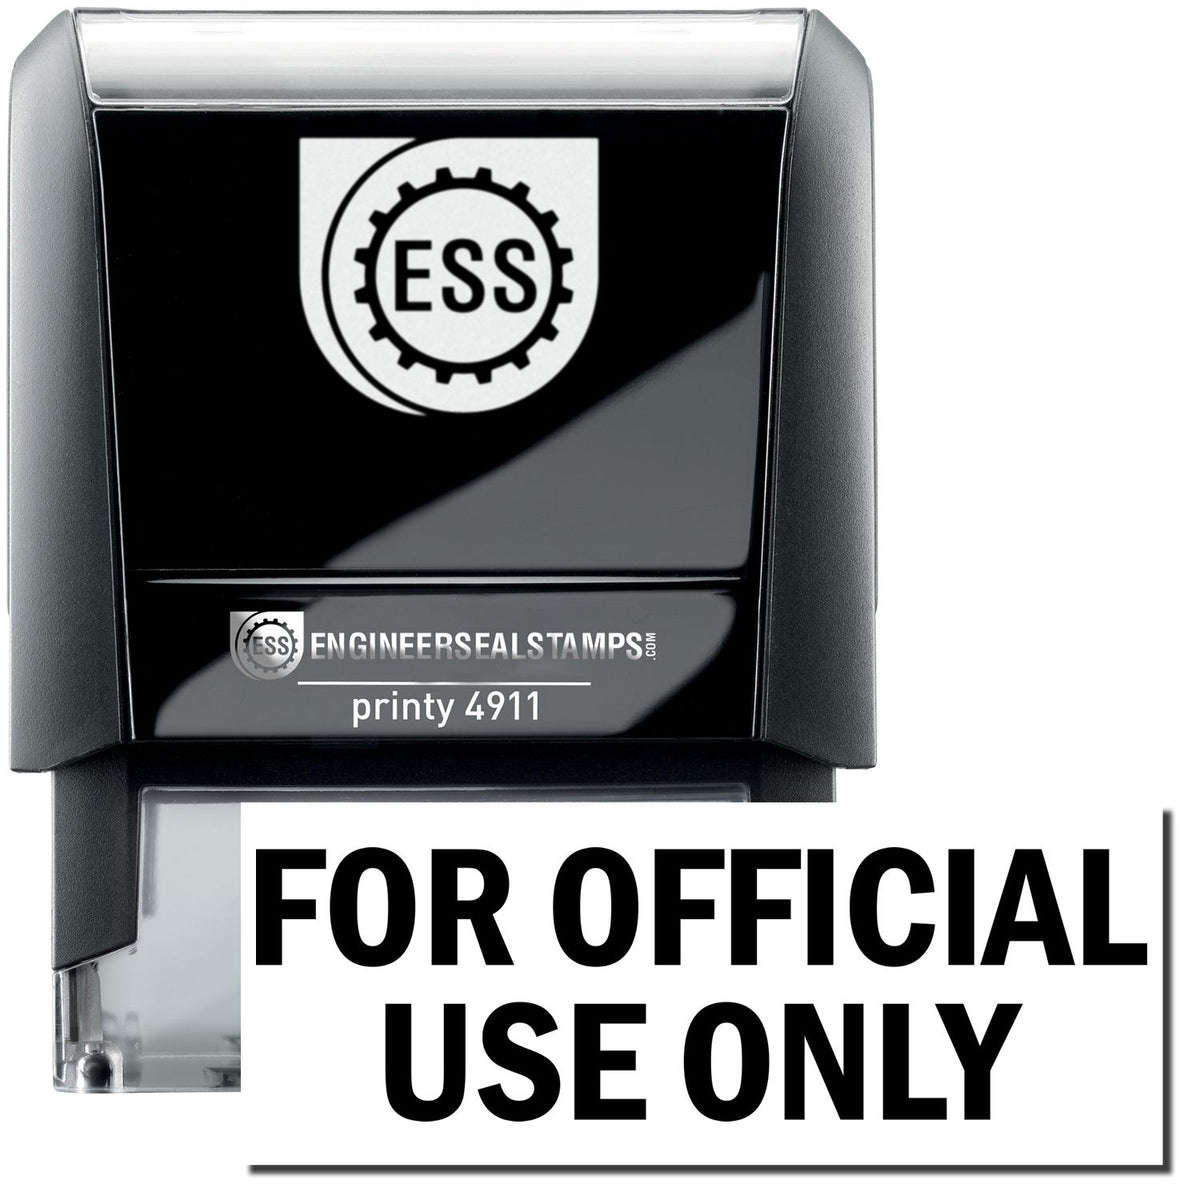 A self-inking stamp with a stamped image showing how the text &quot;FOR OFFICIAL USE ONLY&quot; is displayed after stamping.